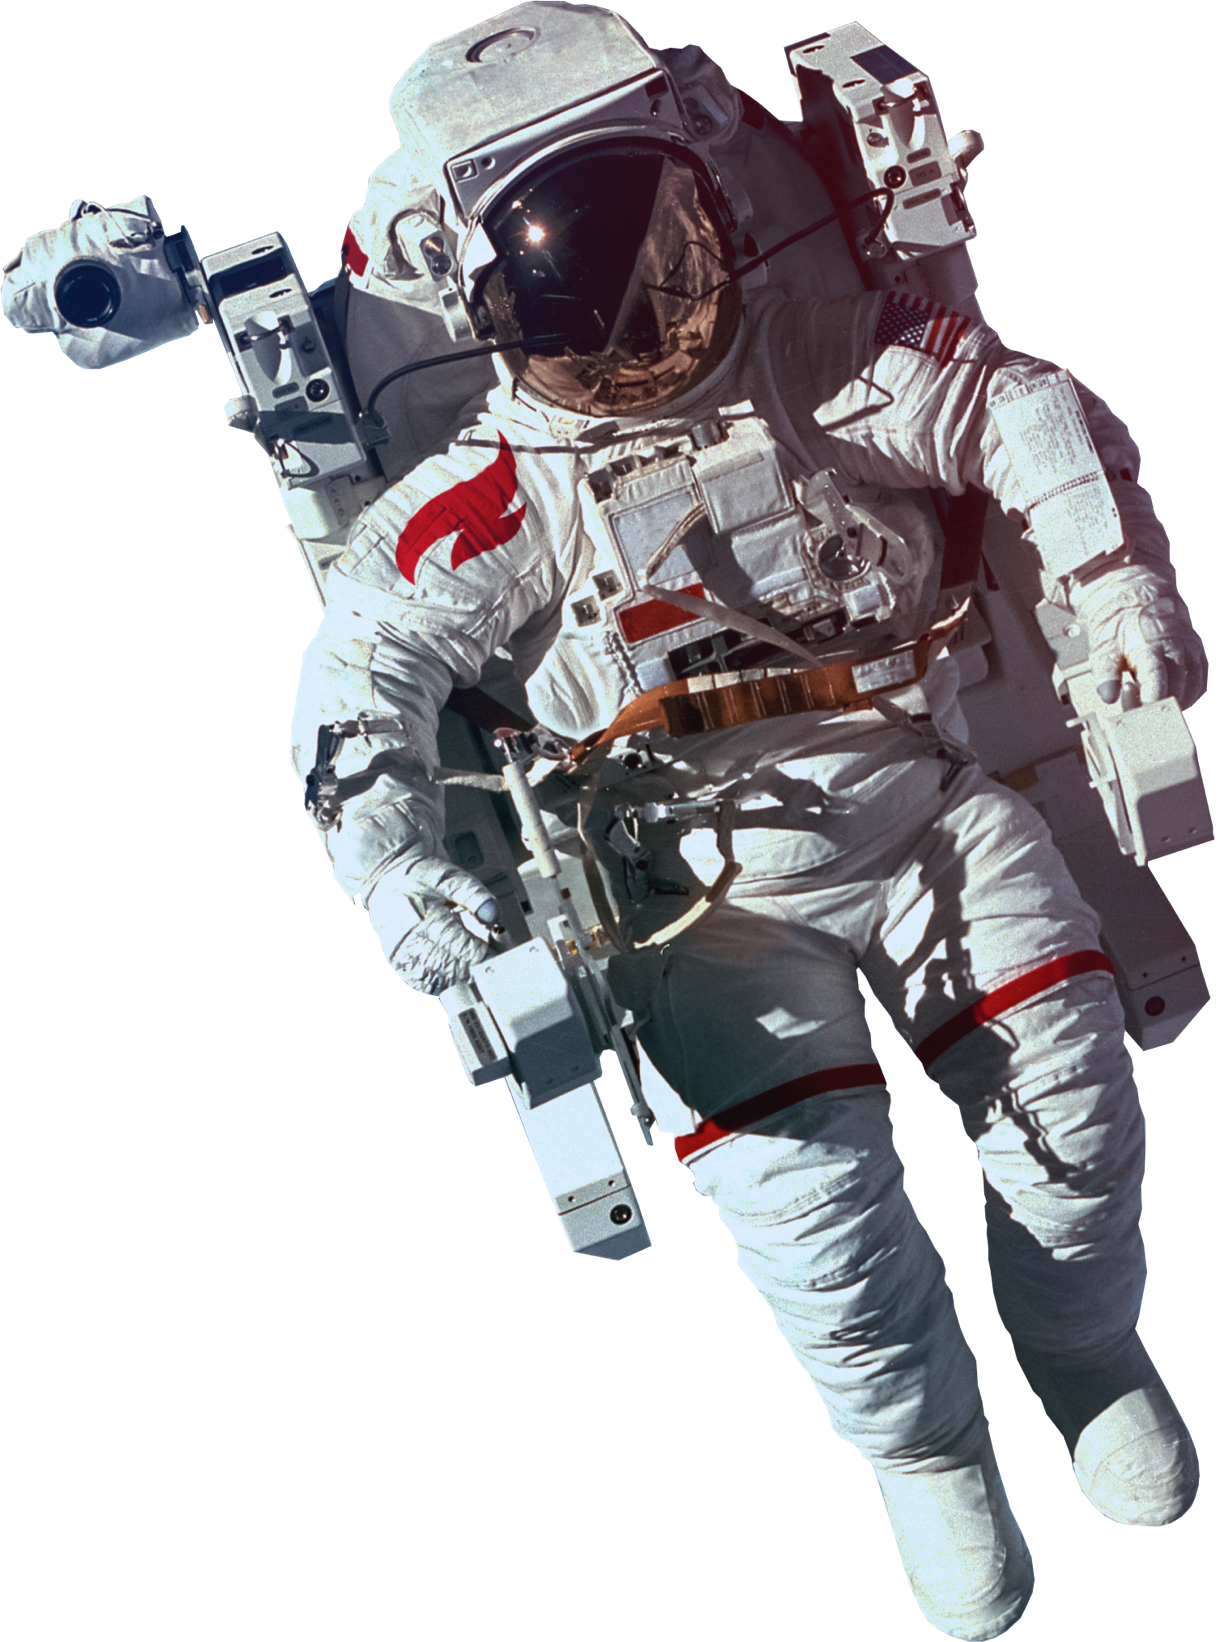 Download Astronaut PNG Image For Free